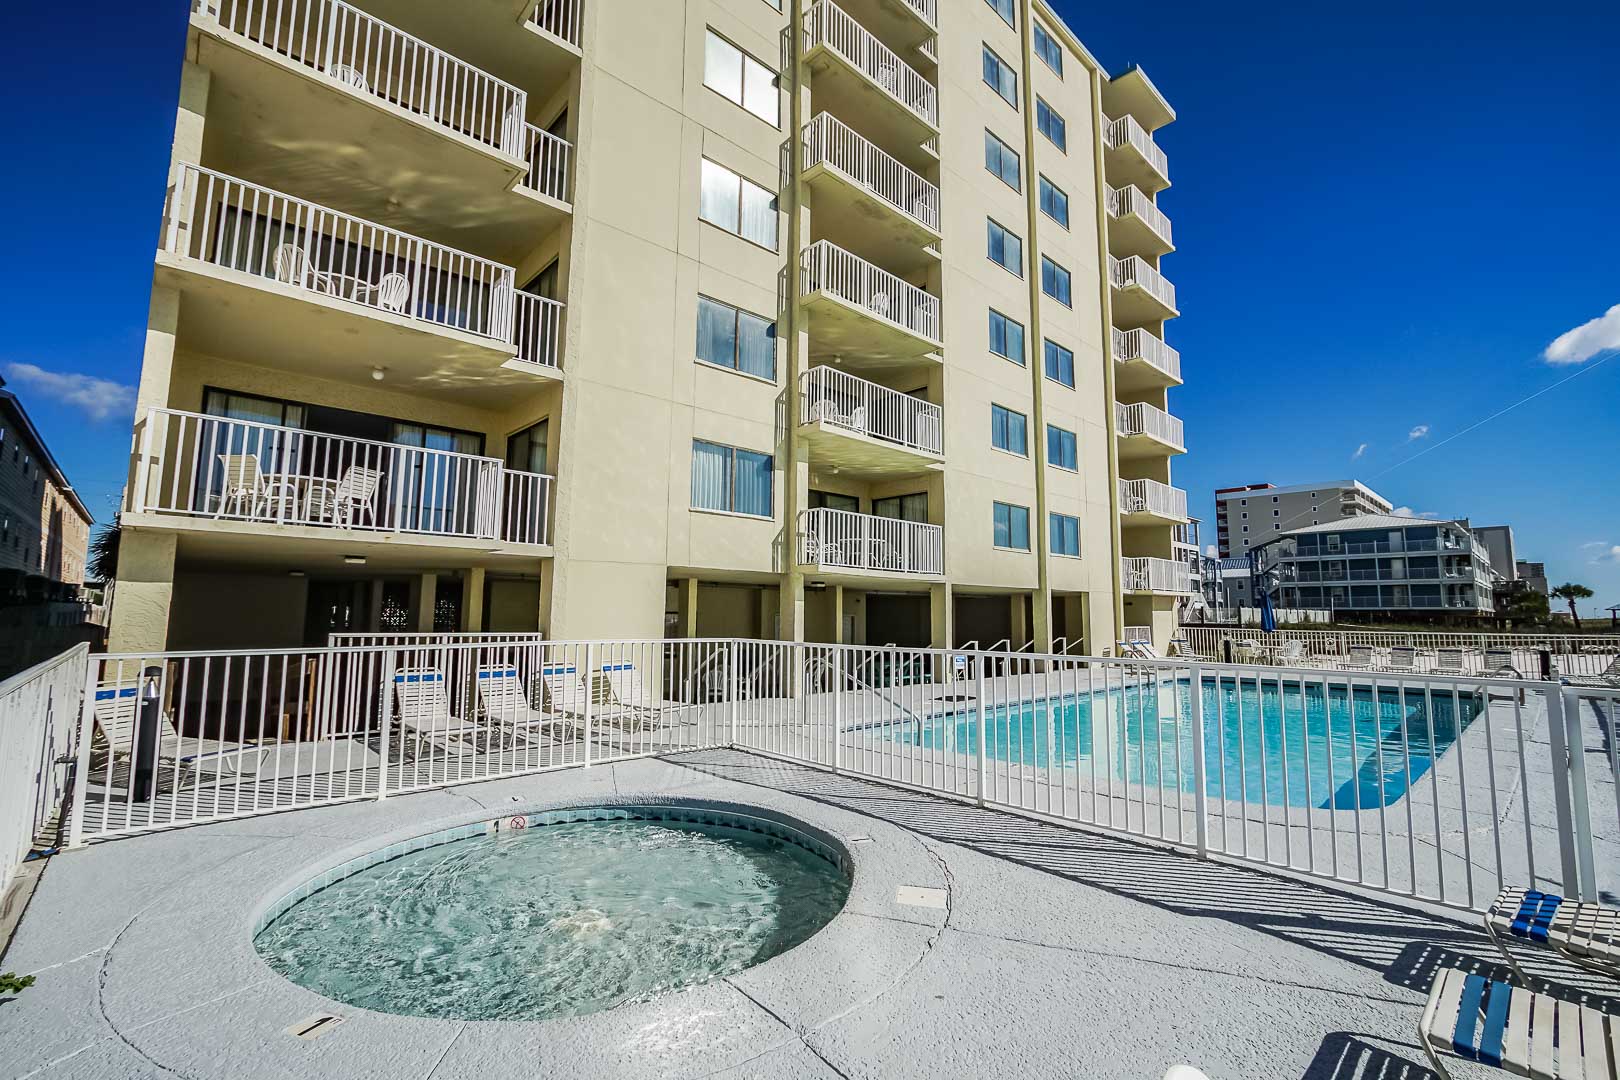 A view of the outside pool and Jacuzzi at VRI's Shoreline Towers in Gulf Shores, Alabama.